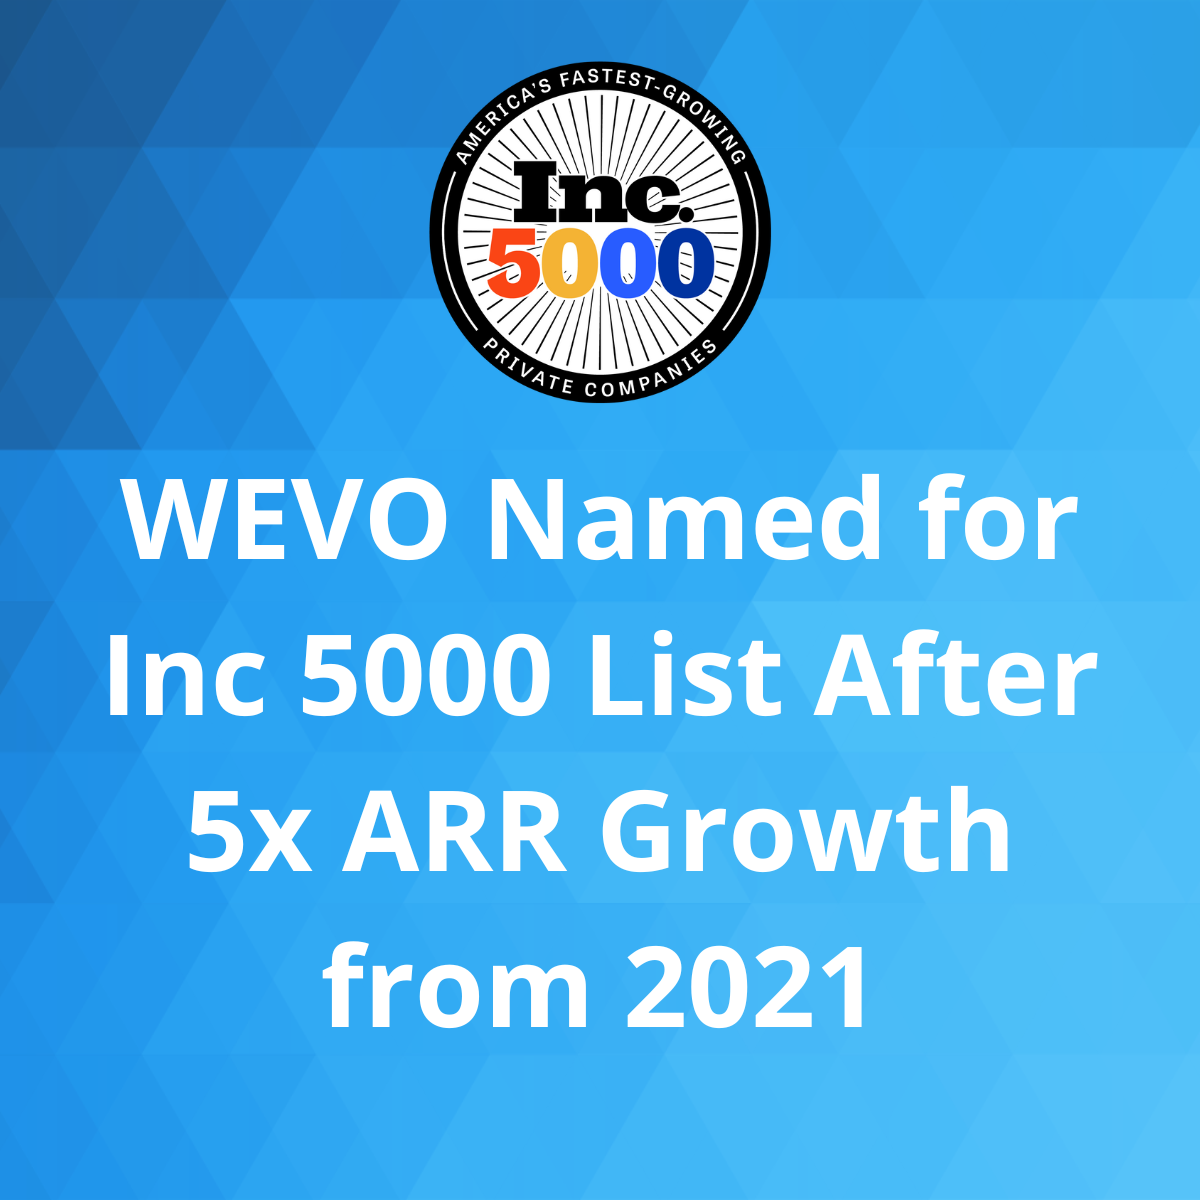 WEVO Conversion, Tuesday, August 16, 2022, Press release picture